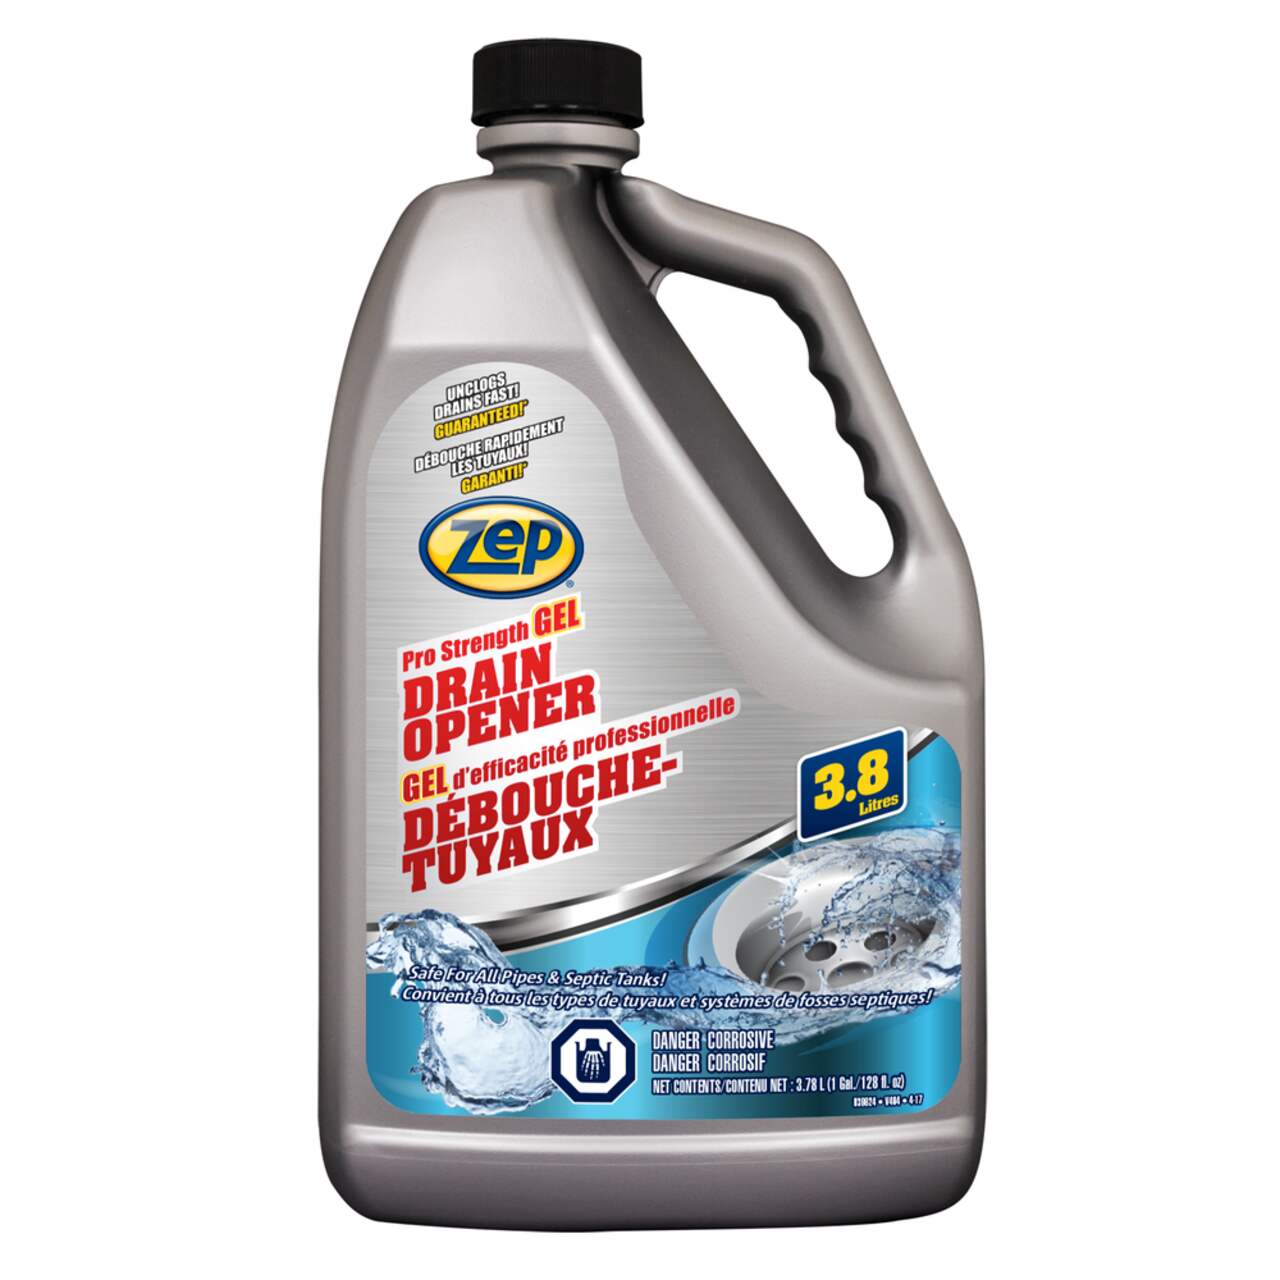 https://media-www.canadiantire.ca/product/living/cleaning/household-cleaning-solutions/0532849/zep-commercial-professional-strength-drain-opener-gallon-021e0006-59d0-4b66-b66f-0fc2de040fba.png?imdensity=1&imwidth=640&impolicy=mZoom